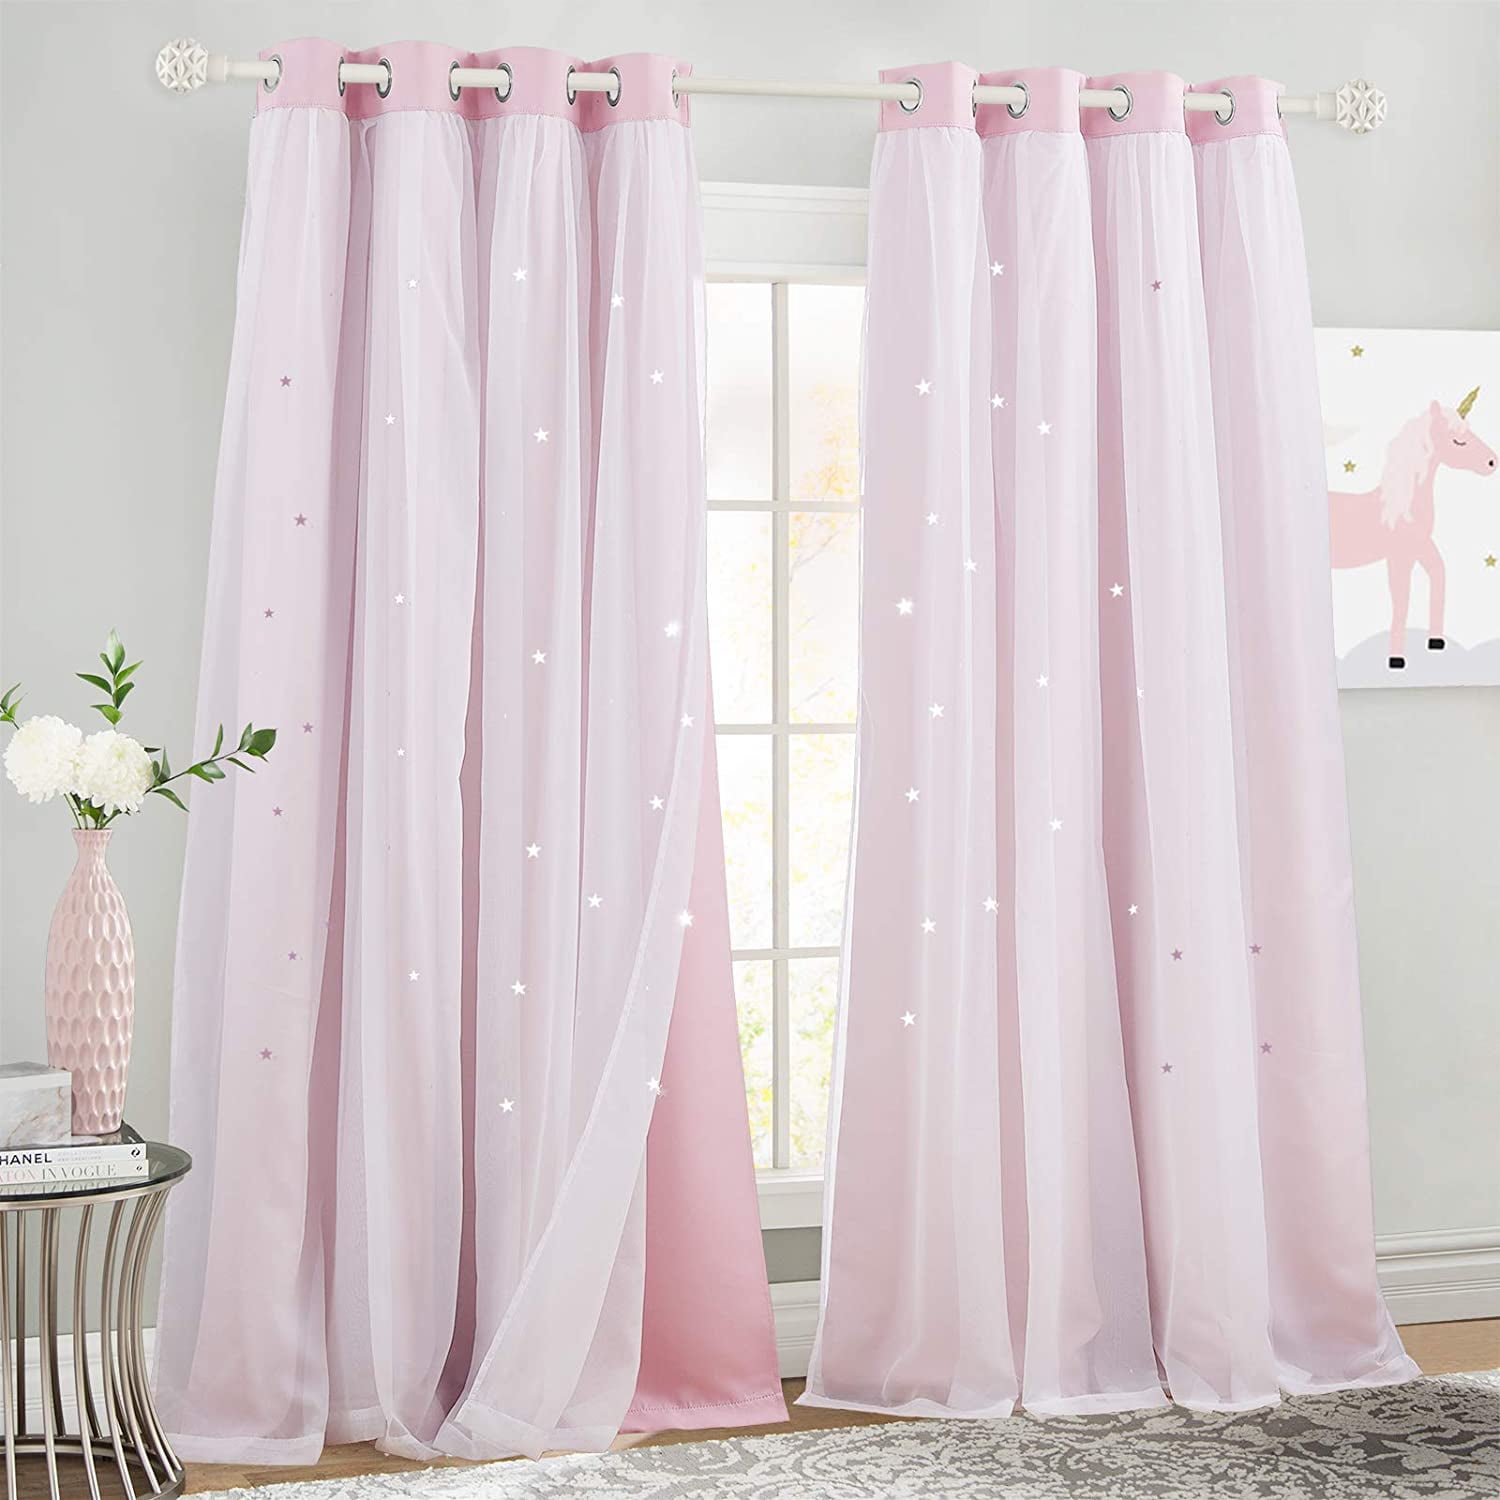 2 Panels W 52 in x L 63 in Grey Pink Nursery Curtains with Net Kids Window Panels with Eyelets for Living Room NICETOWN Pink Star Blackout Curtains for Girls Bedroom 